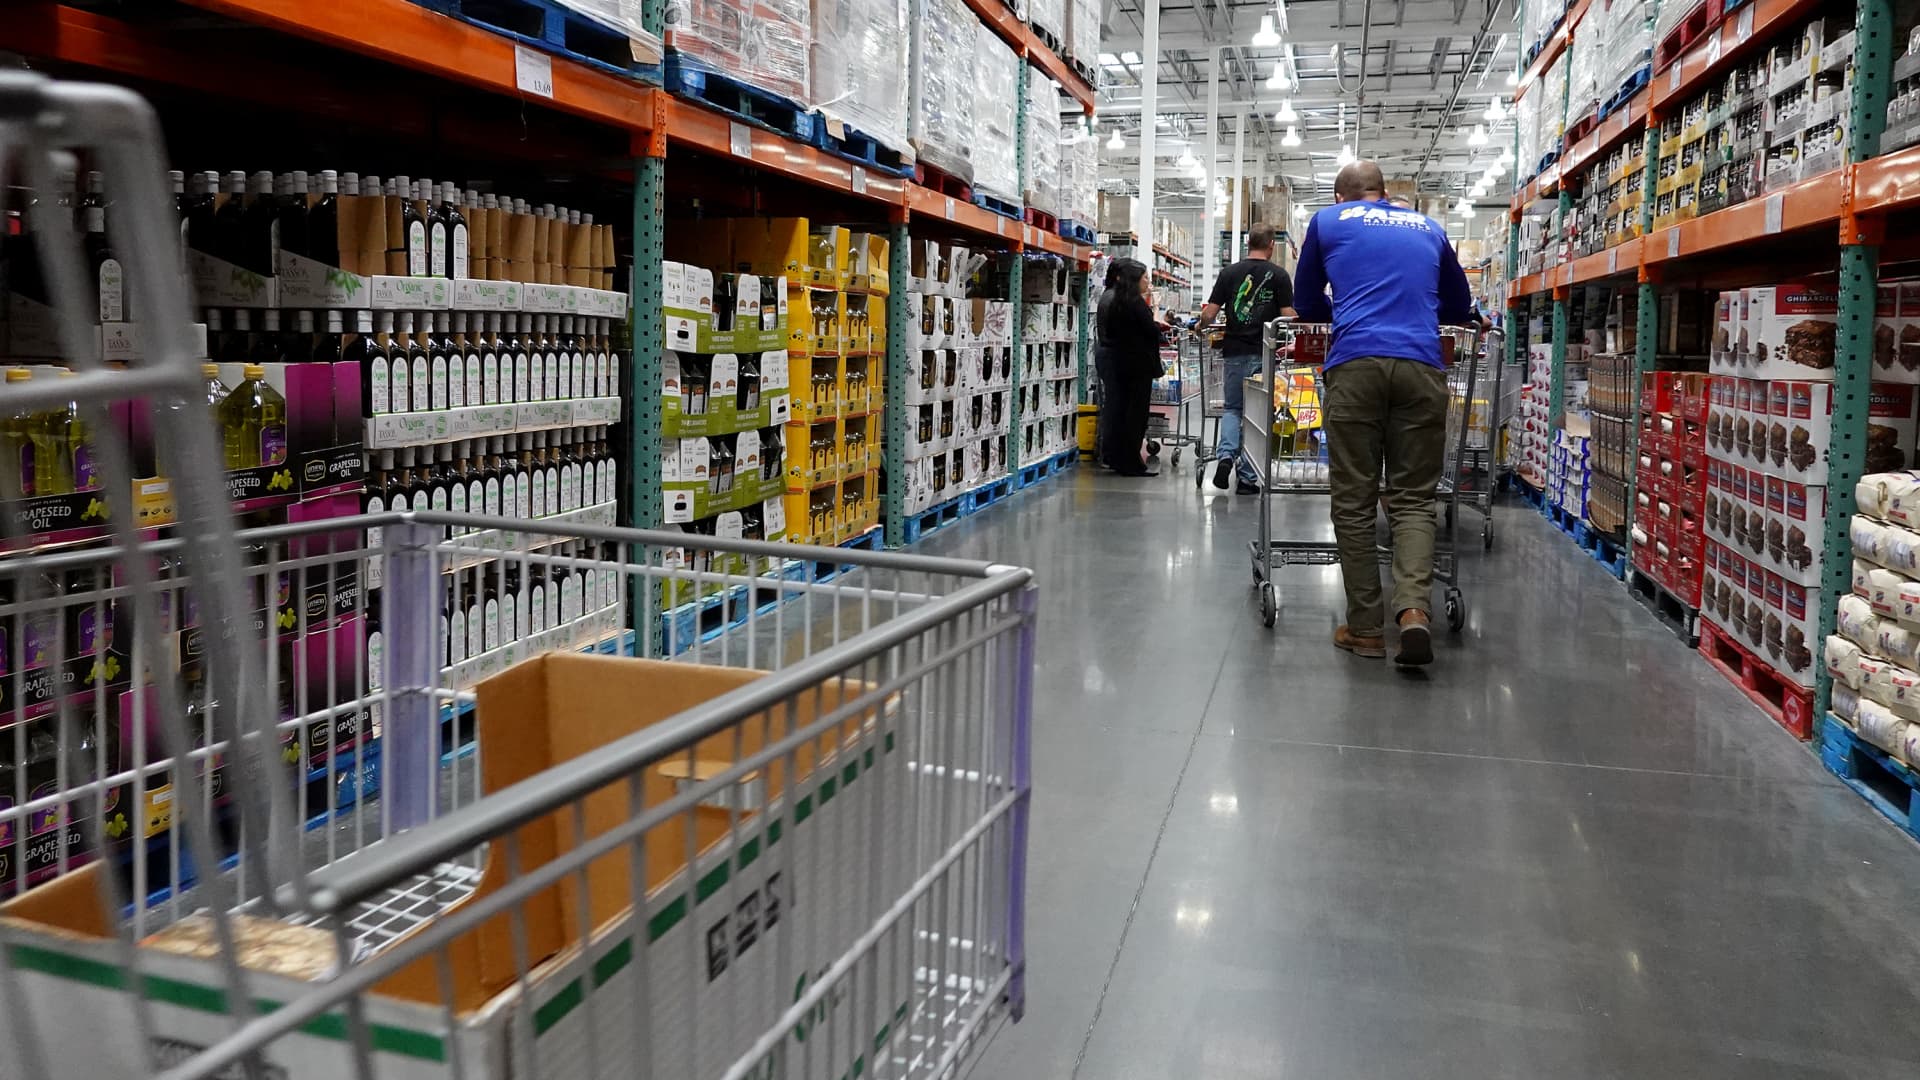 January wholesale prices rise more than expected, another sign of persistent inflation